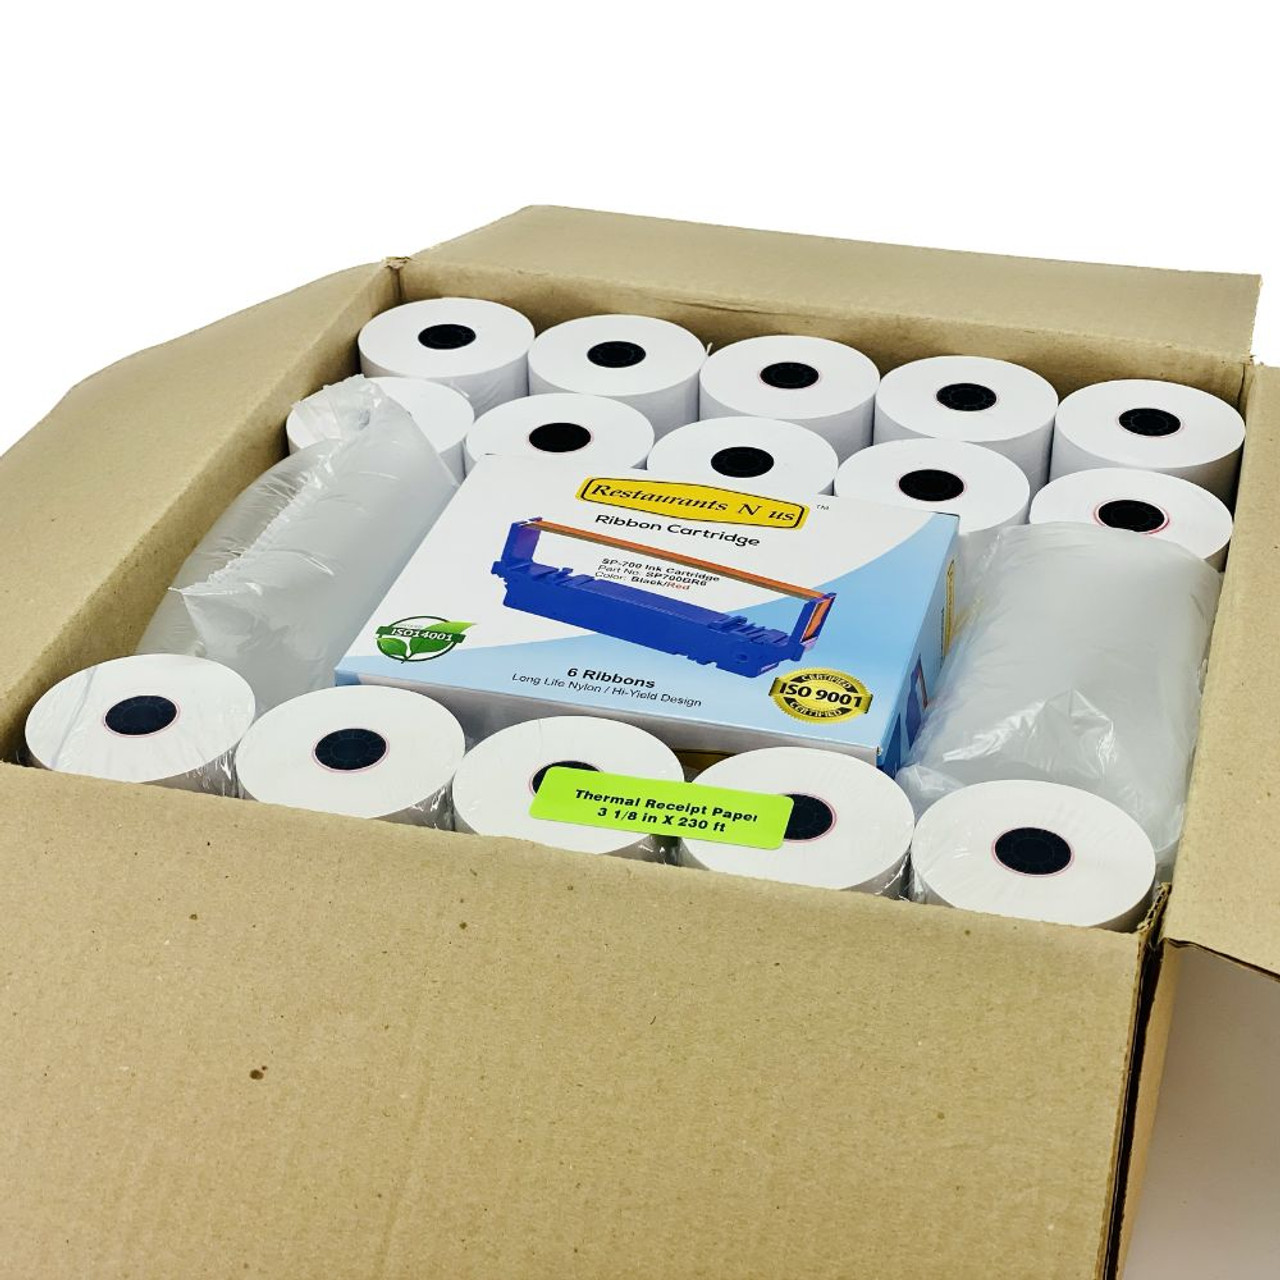 Thermal Paper Receipt Paper & Ribbons